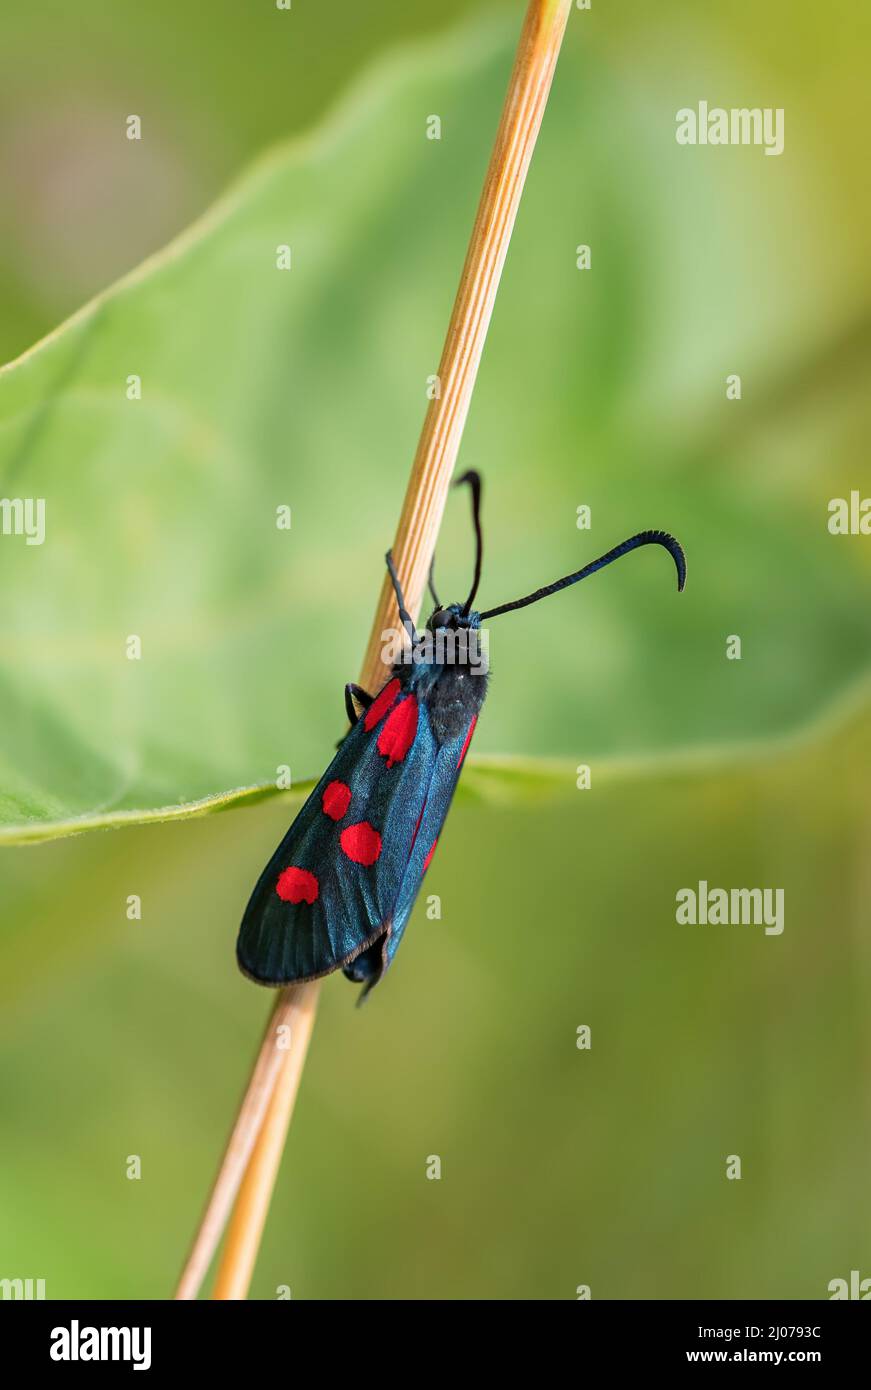 Narrow-bordered Five-spot Burnet - Zygaena lonicerae, beautiful black and red butterfly from European meadows and grasslands, Stramberk, Czech Republi Stock Photo